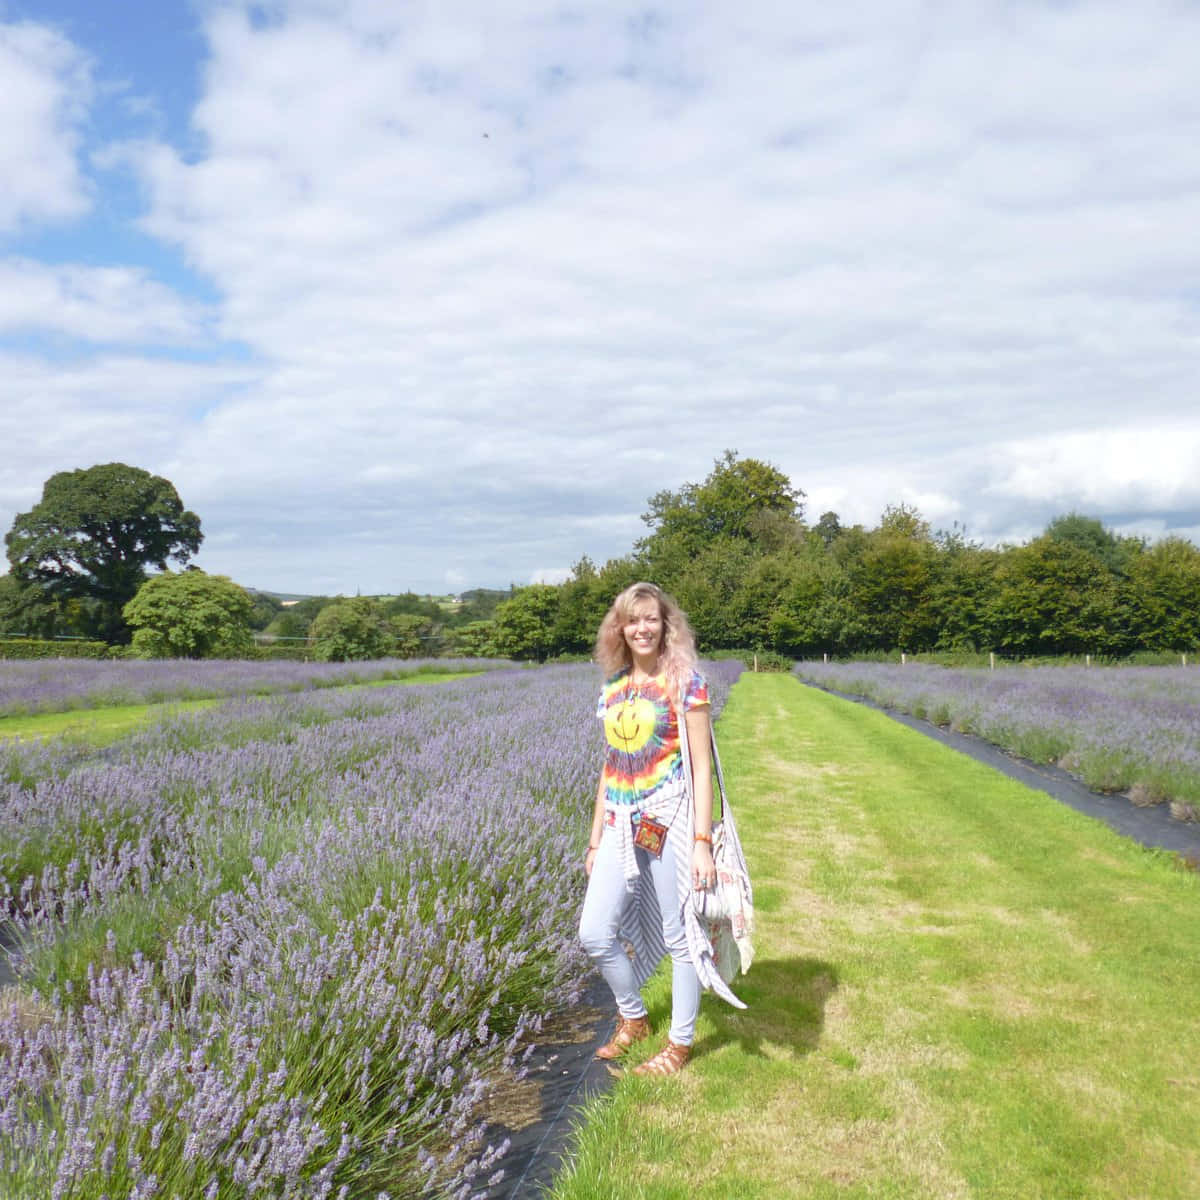 Capturing the Beauty of the Lavender Field